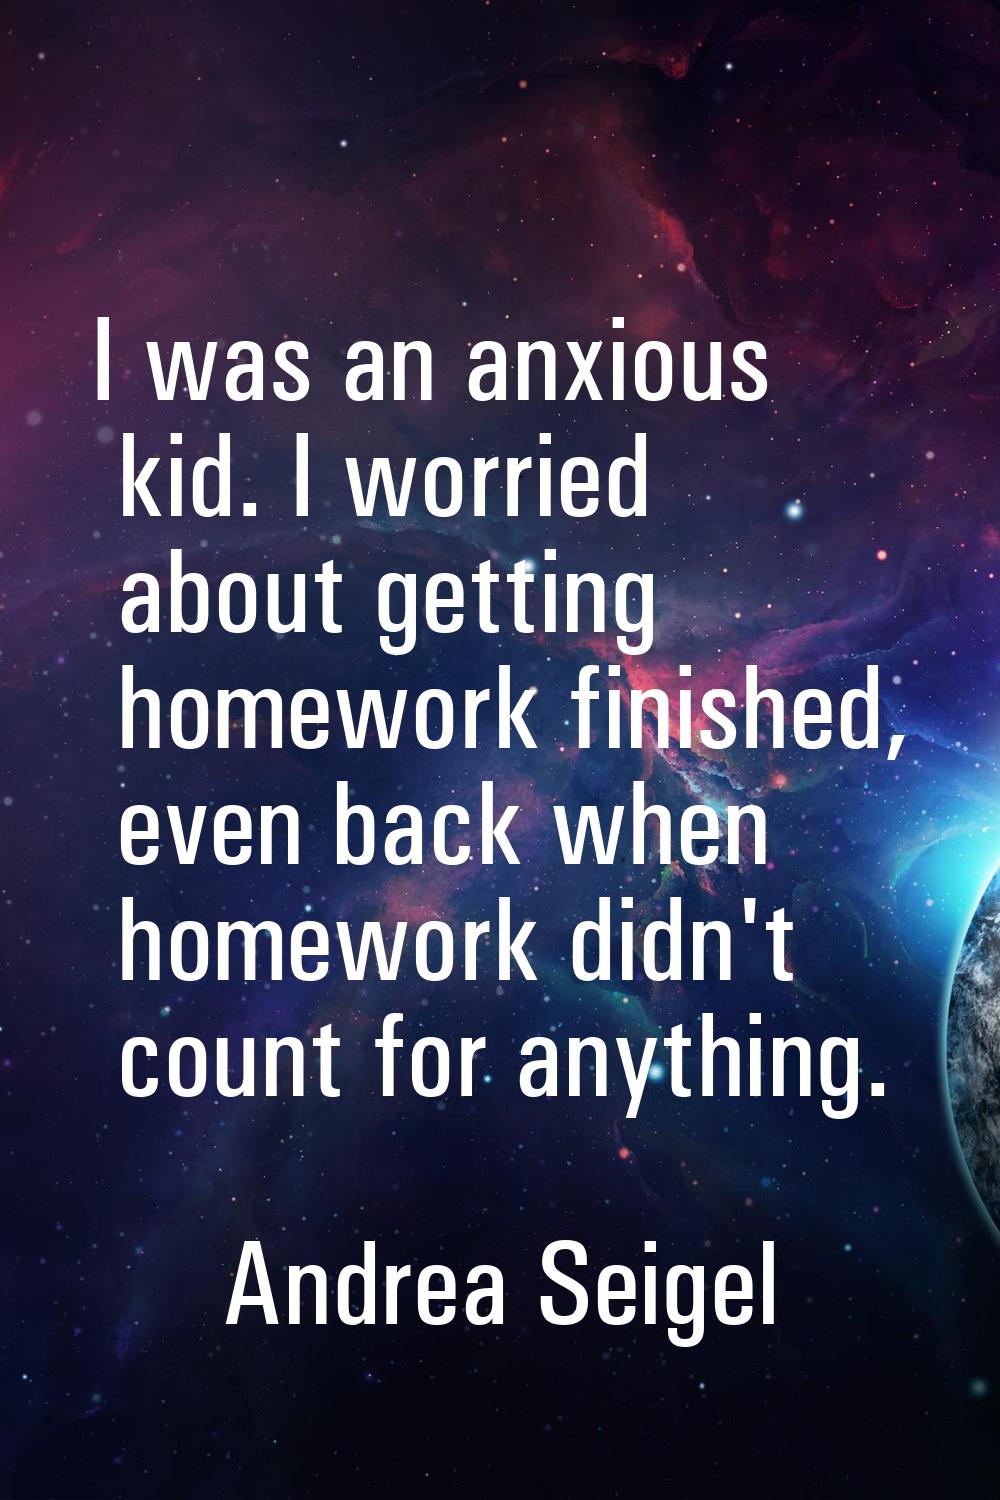 I was an anxious kid. I worried about getting homework finished, even back when homework didn't cou